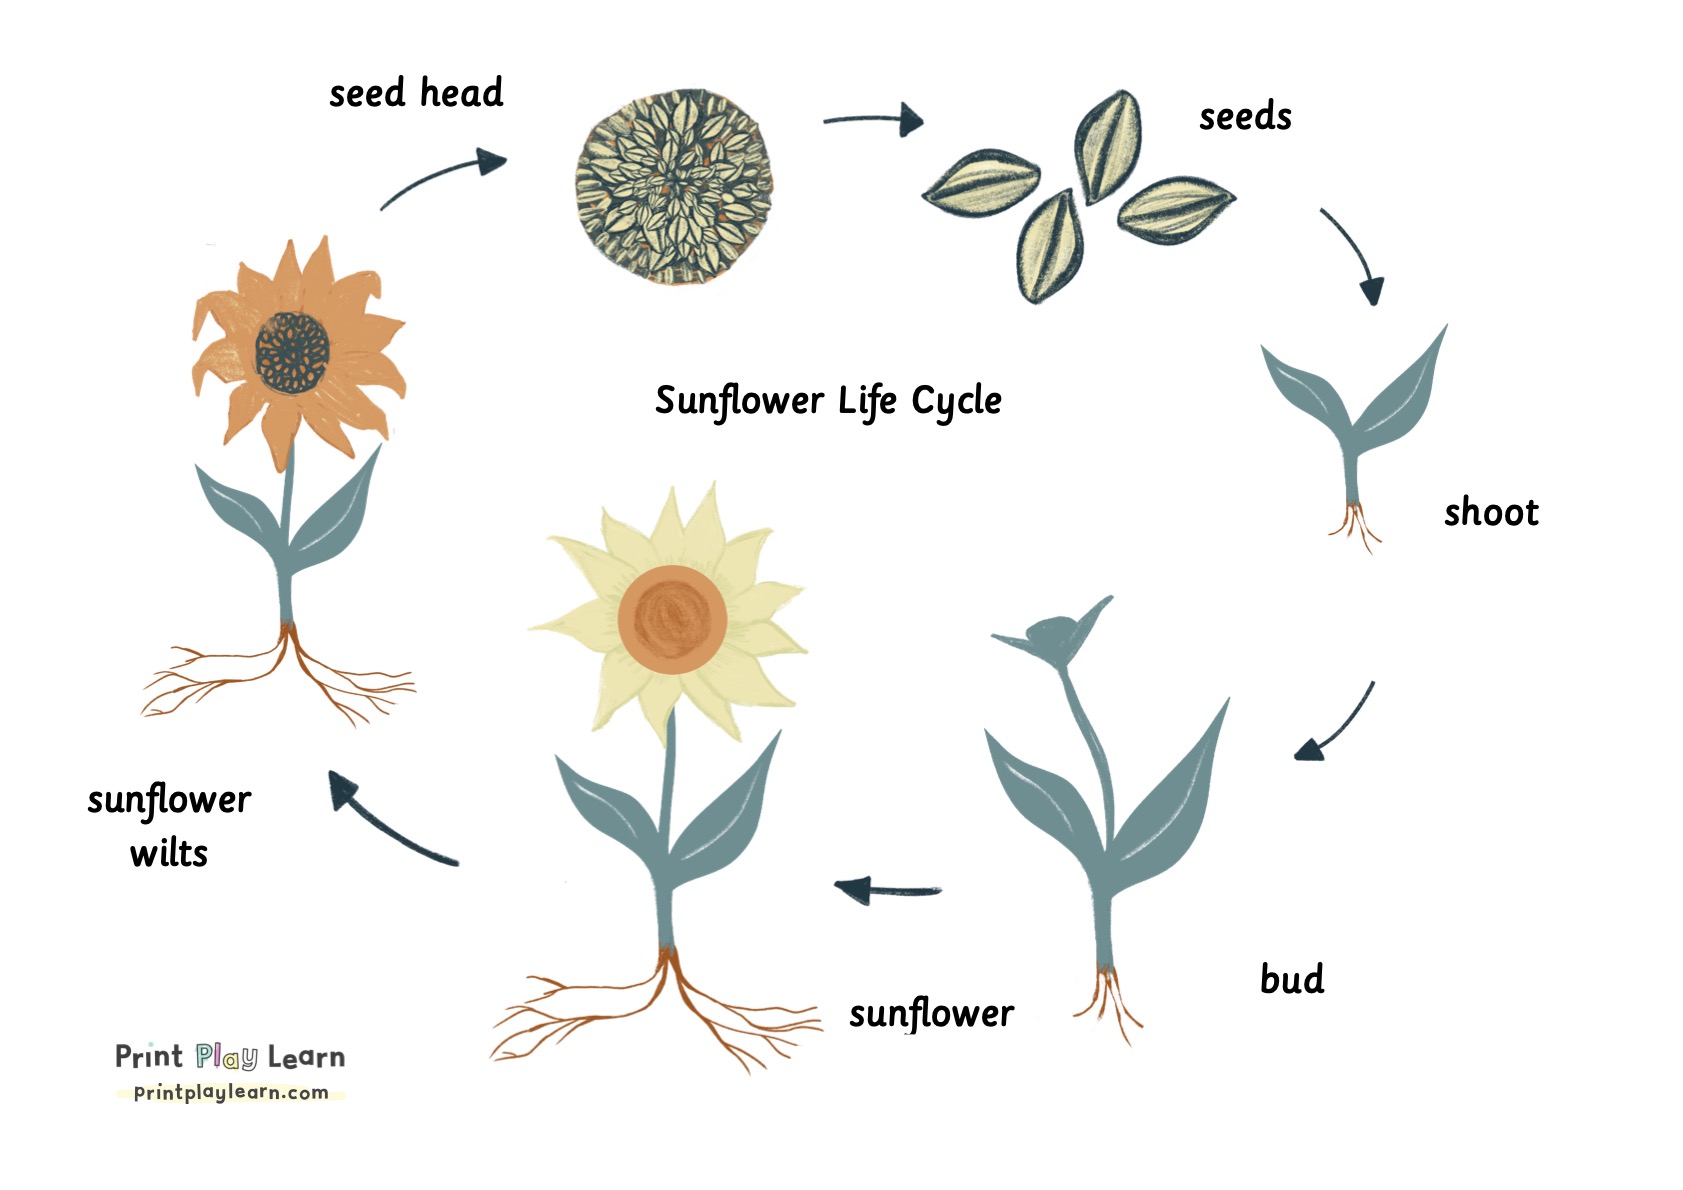 Sunflower Life Cycle Poster - Printable Teaching Resources - Print Play ...